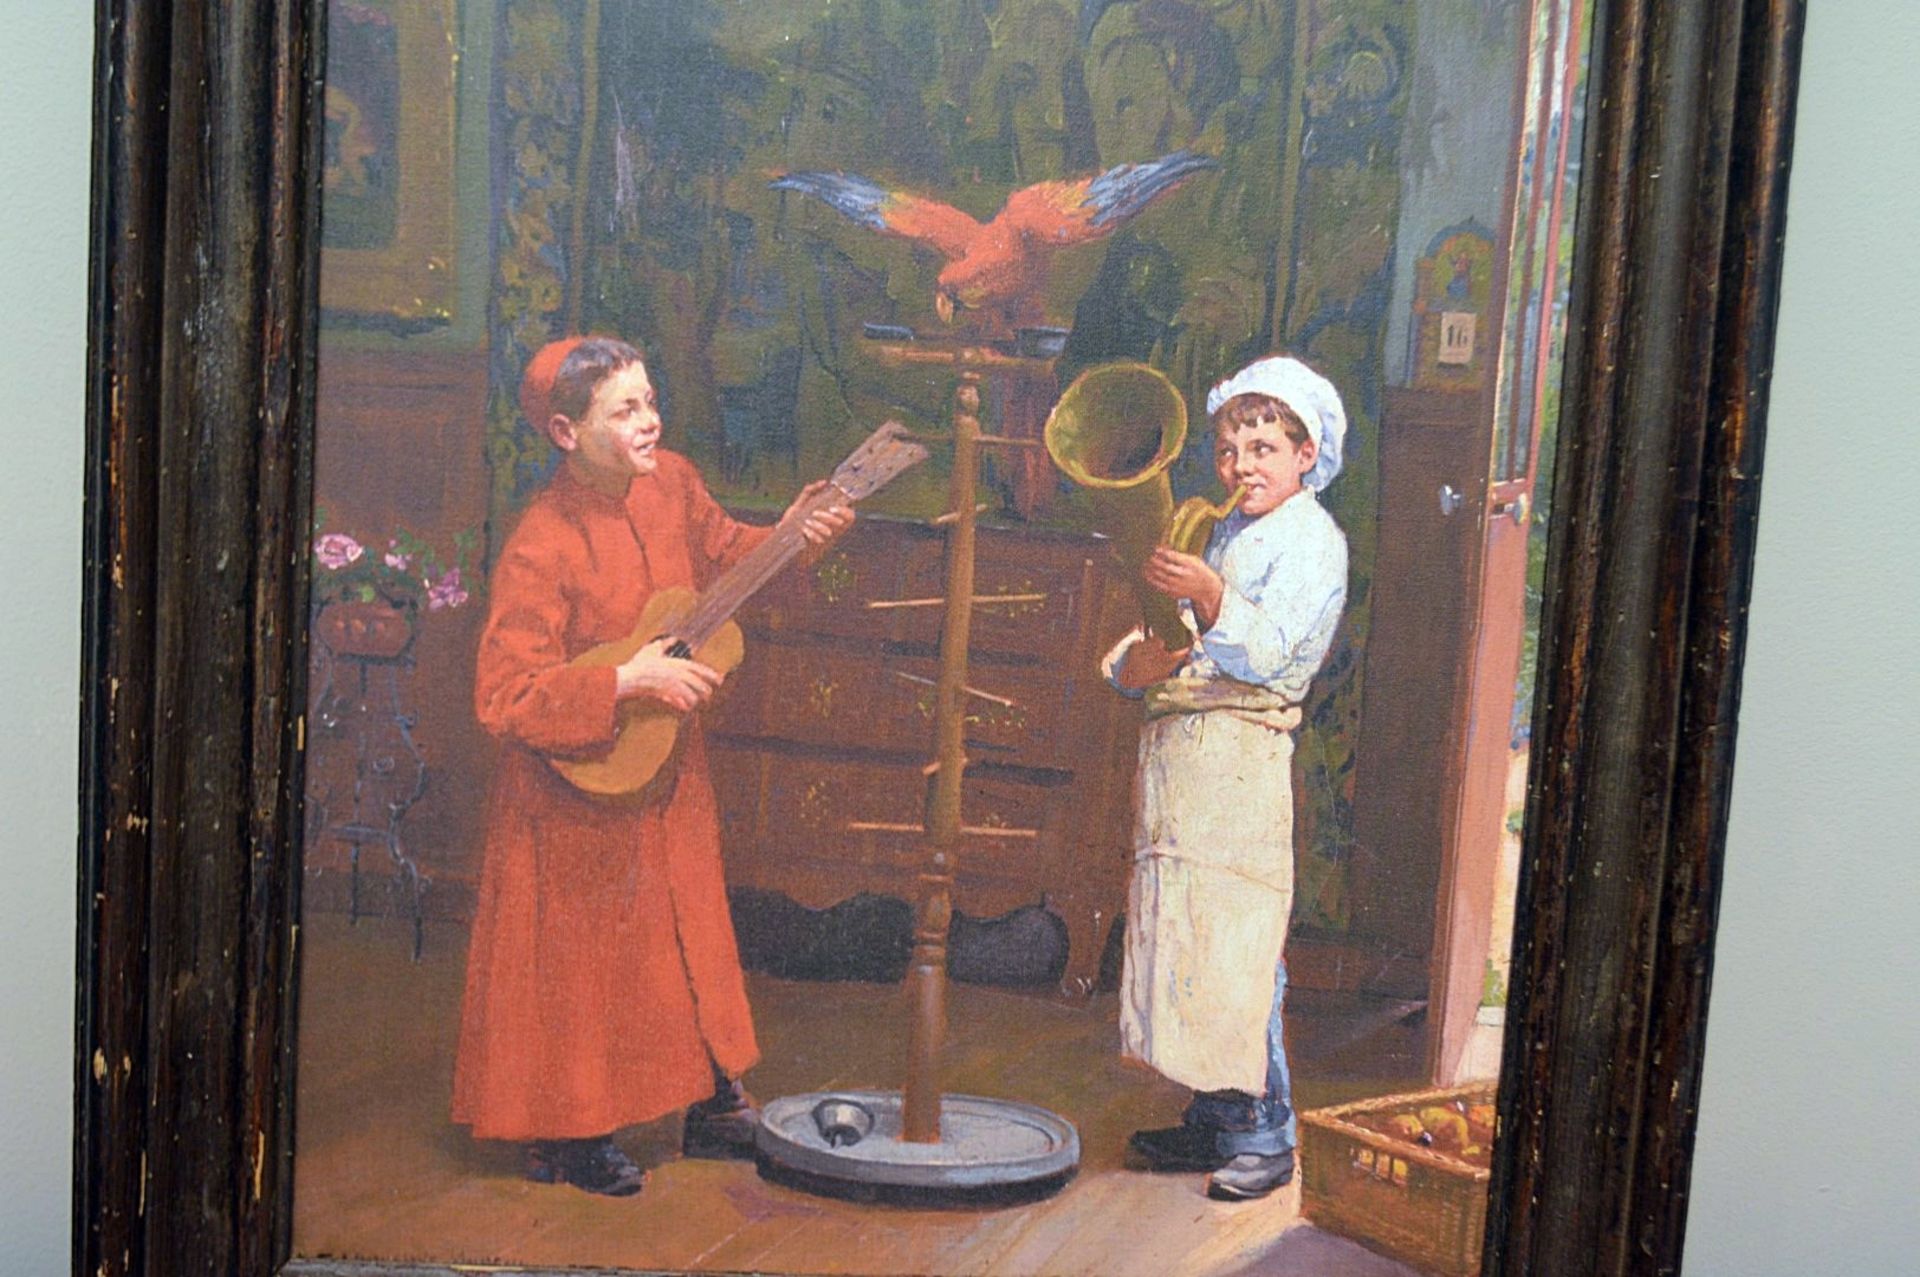 1 x Ornately Framed Canvas Print Depicting Boys With A Parrot - Dimensions: 60 x 70cm - Ref: MD160 / - Image 4 of 4